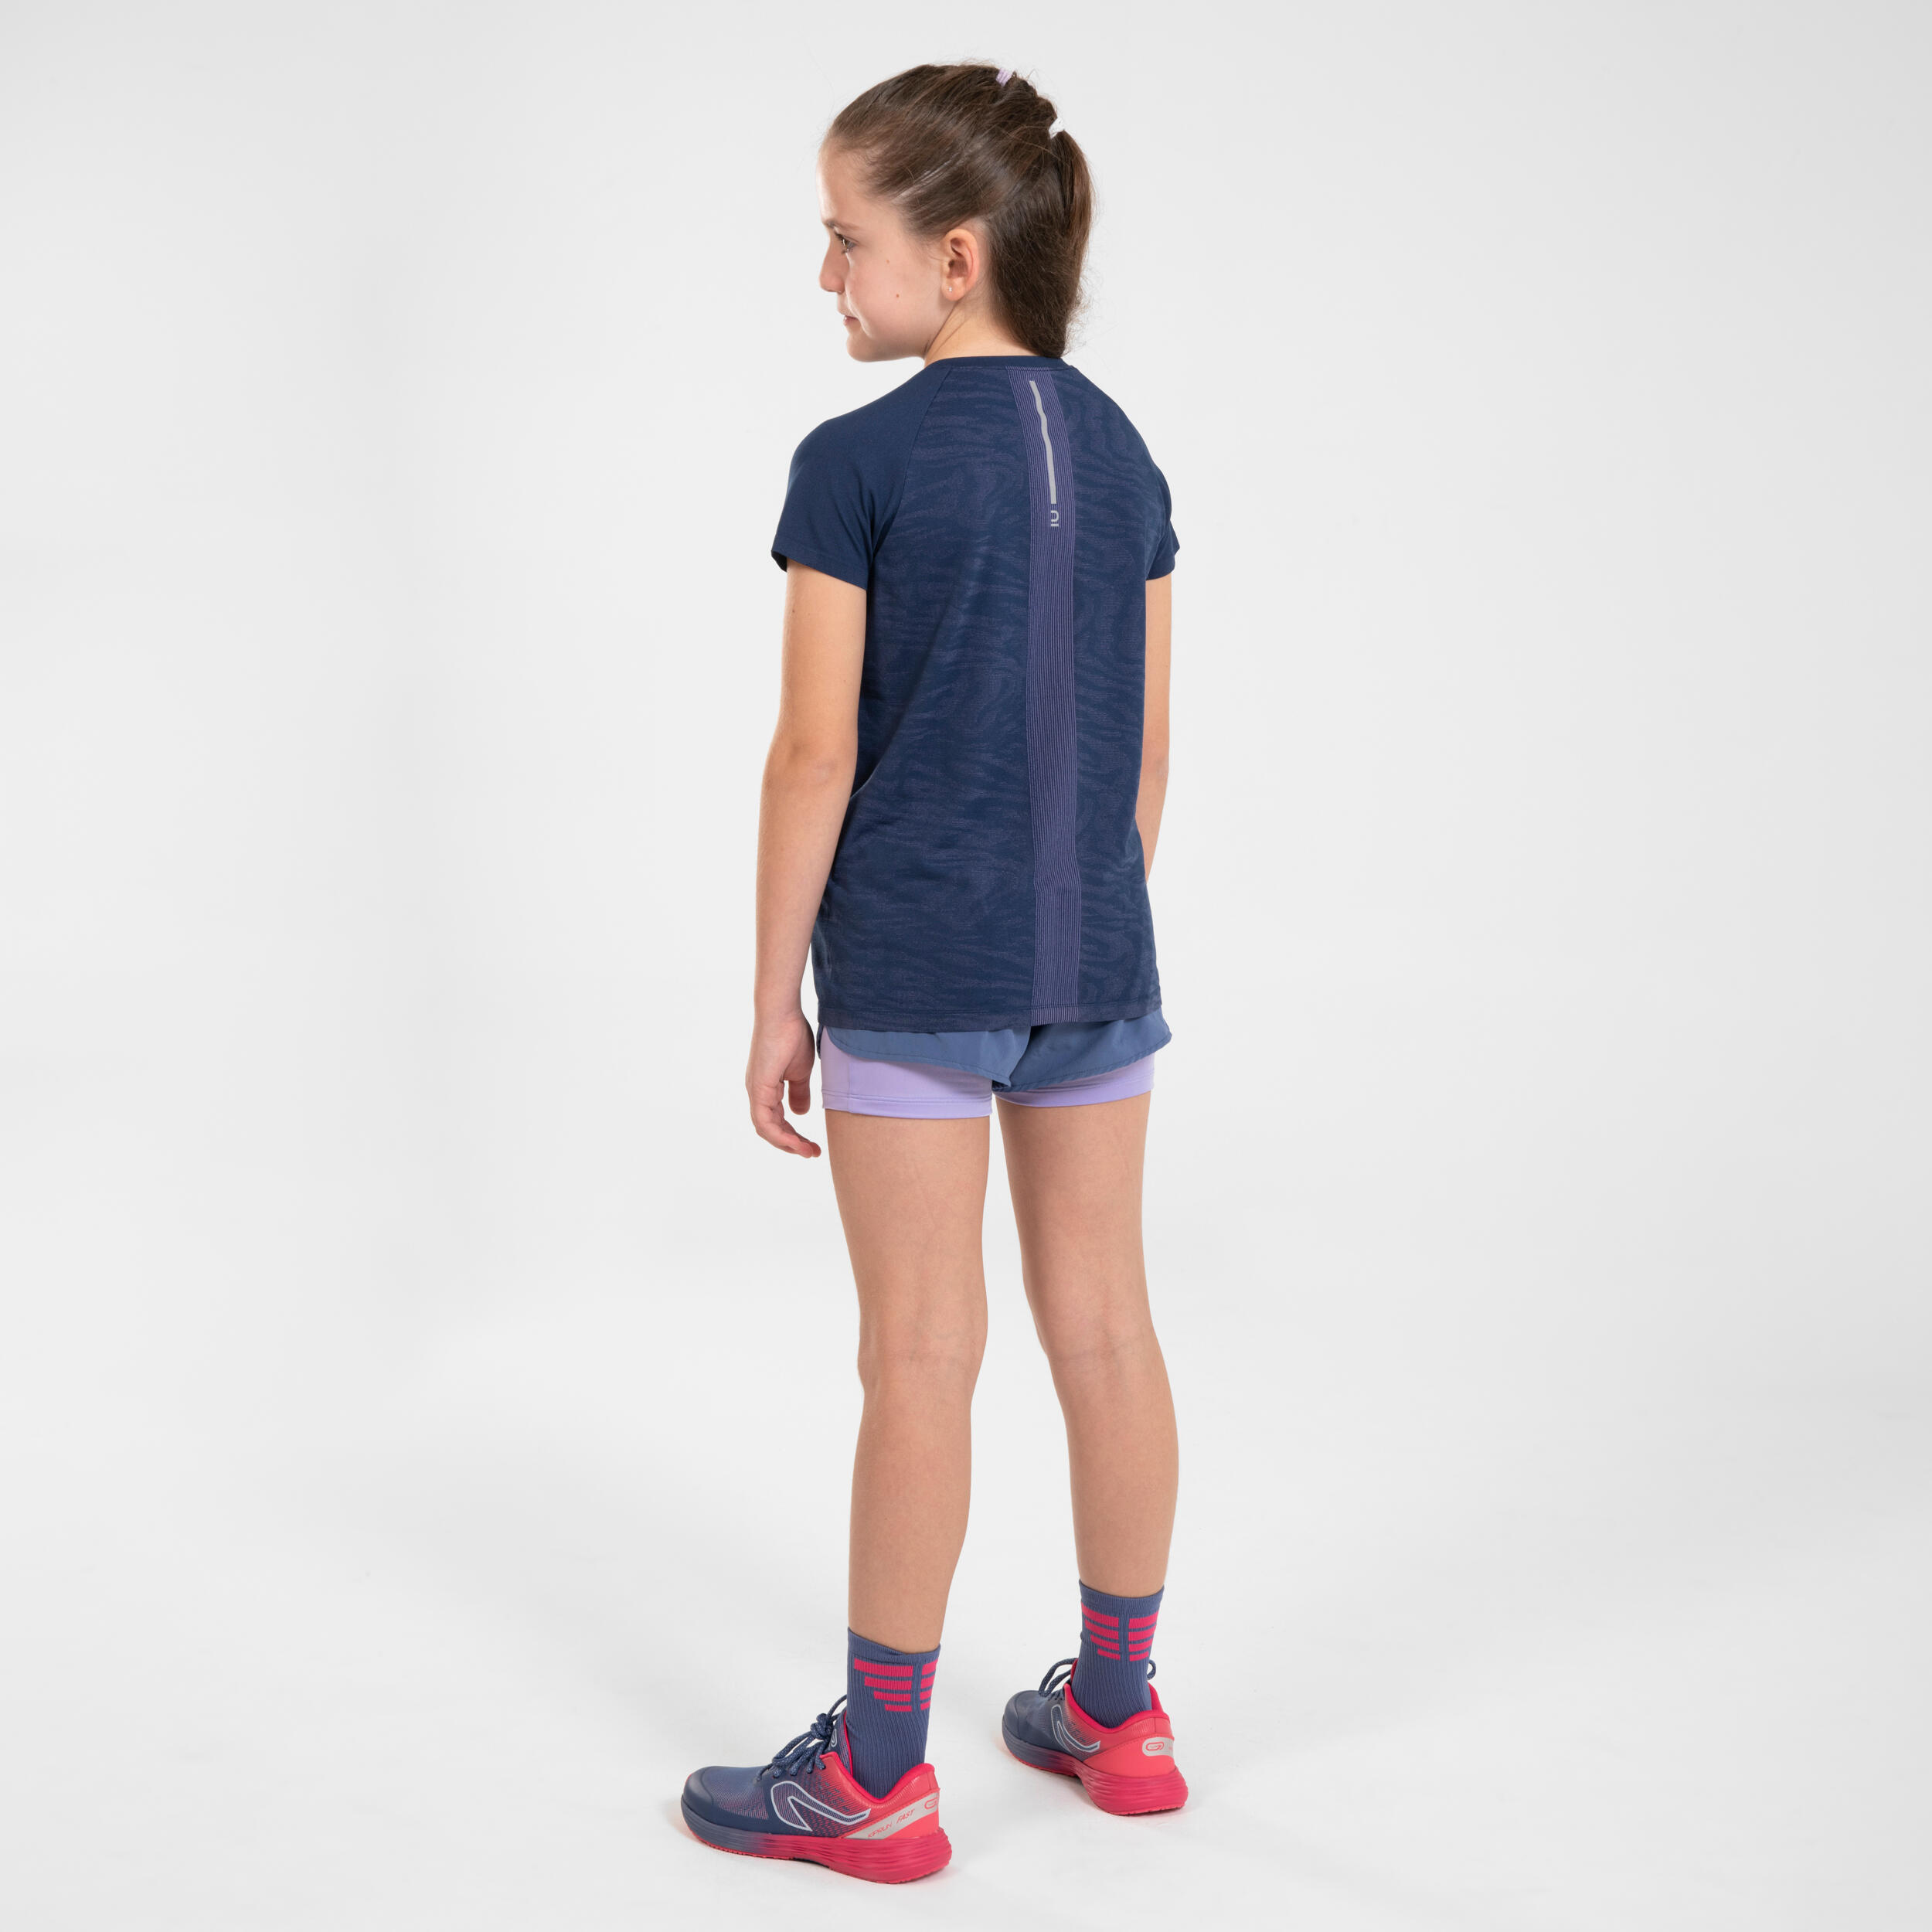 KIPRUN DRY+ girl's breathable 2-in-1 tight running shorts - denim and mauve 14/14